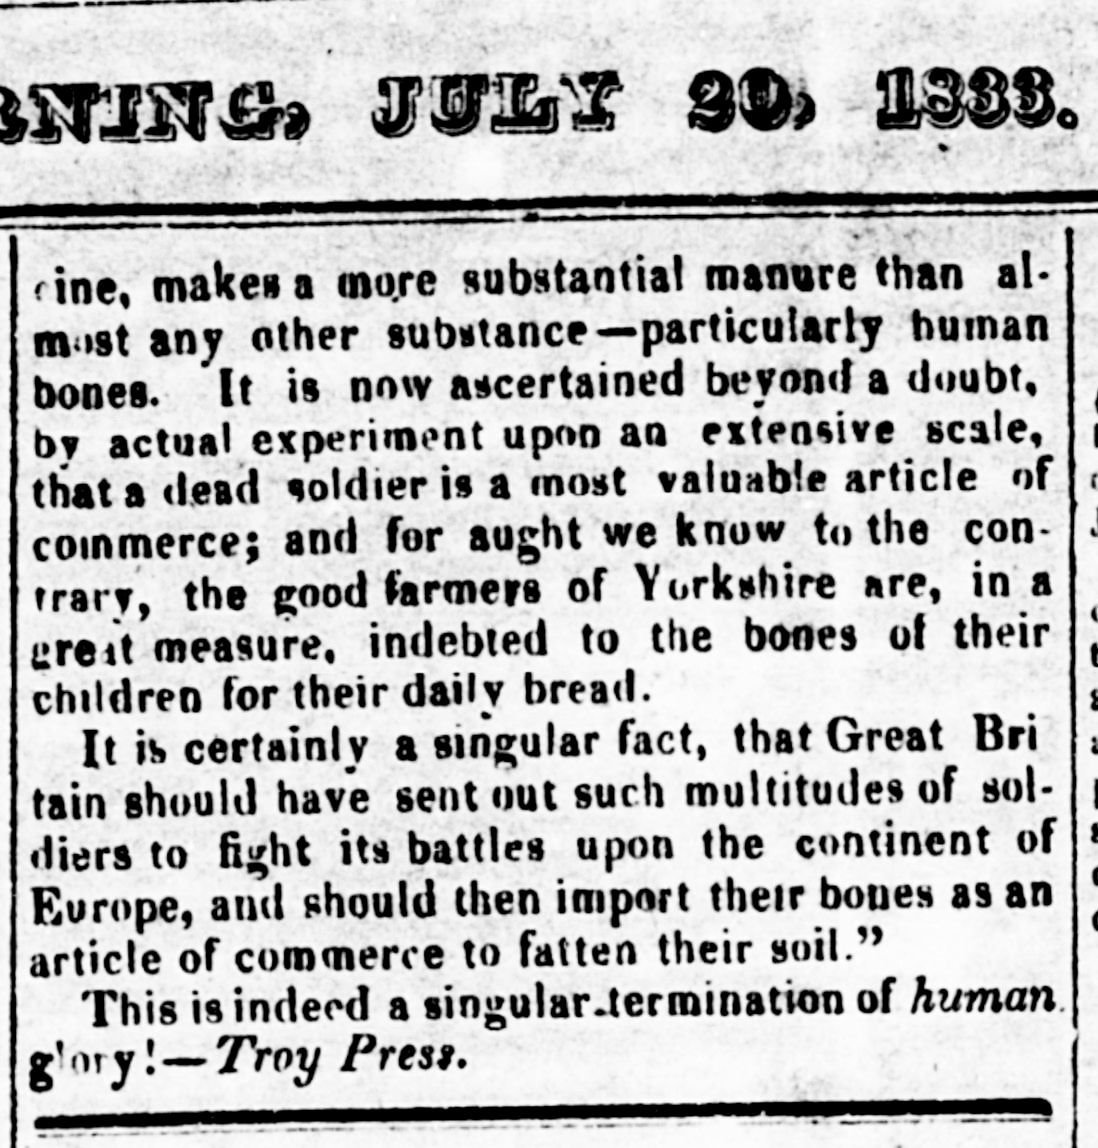 9.  "I'll grind his bones to make my bread!"The Phenix Gazette July 20, 1833 front page